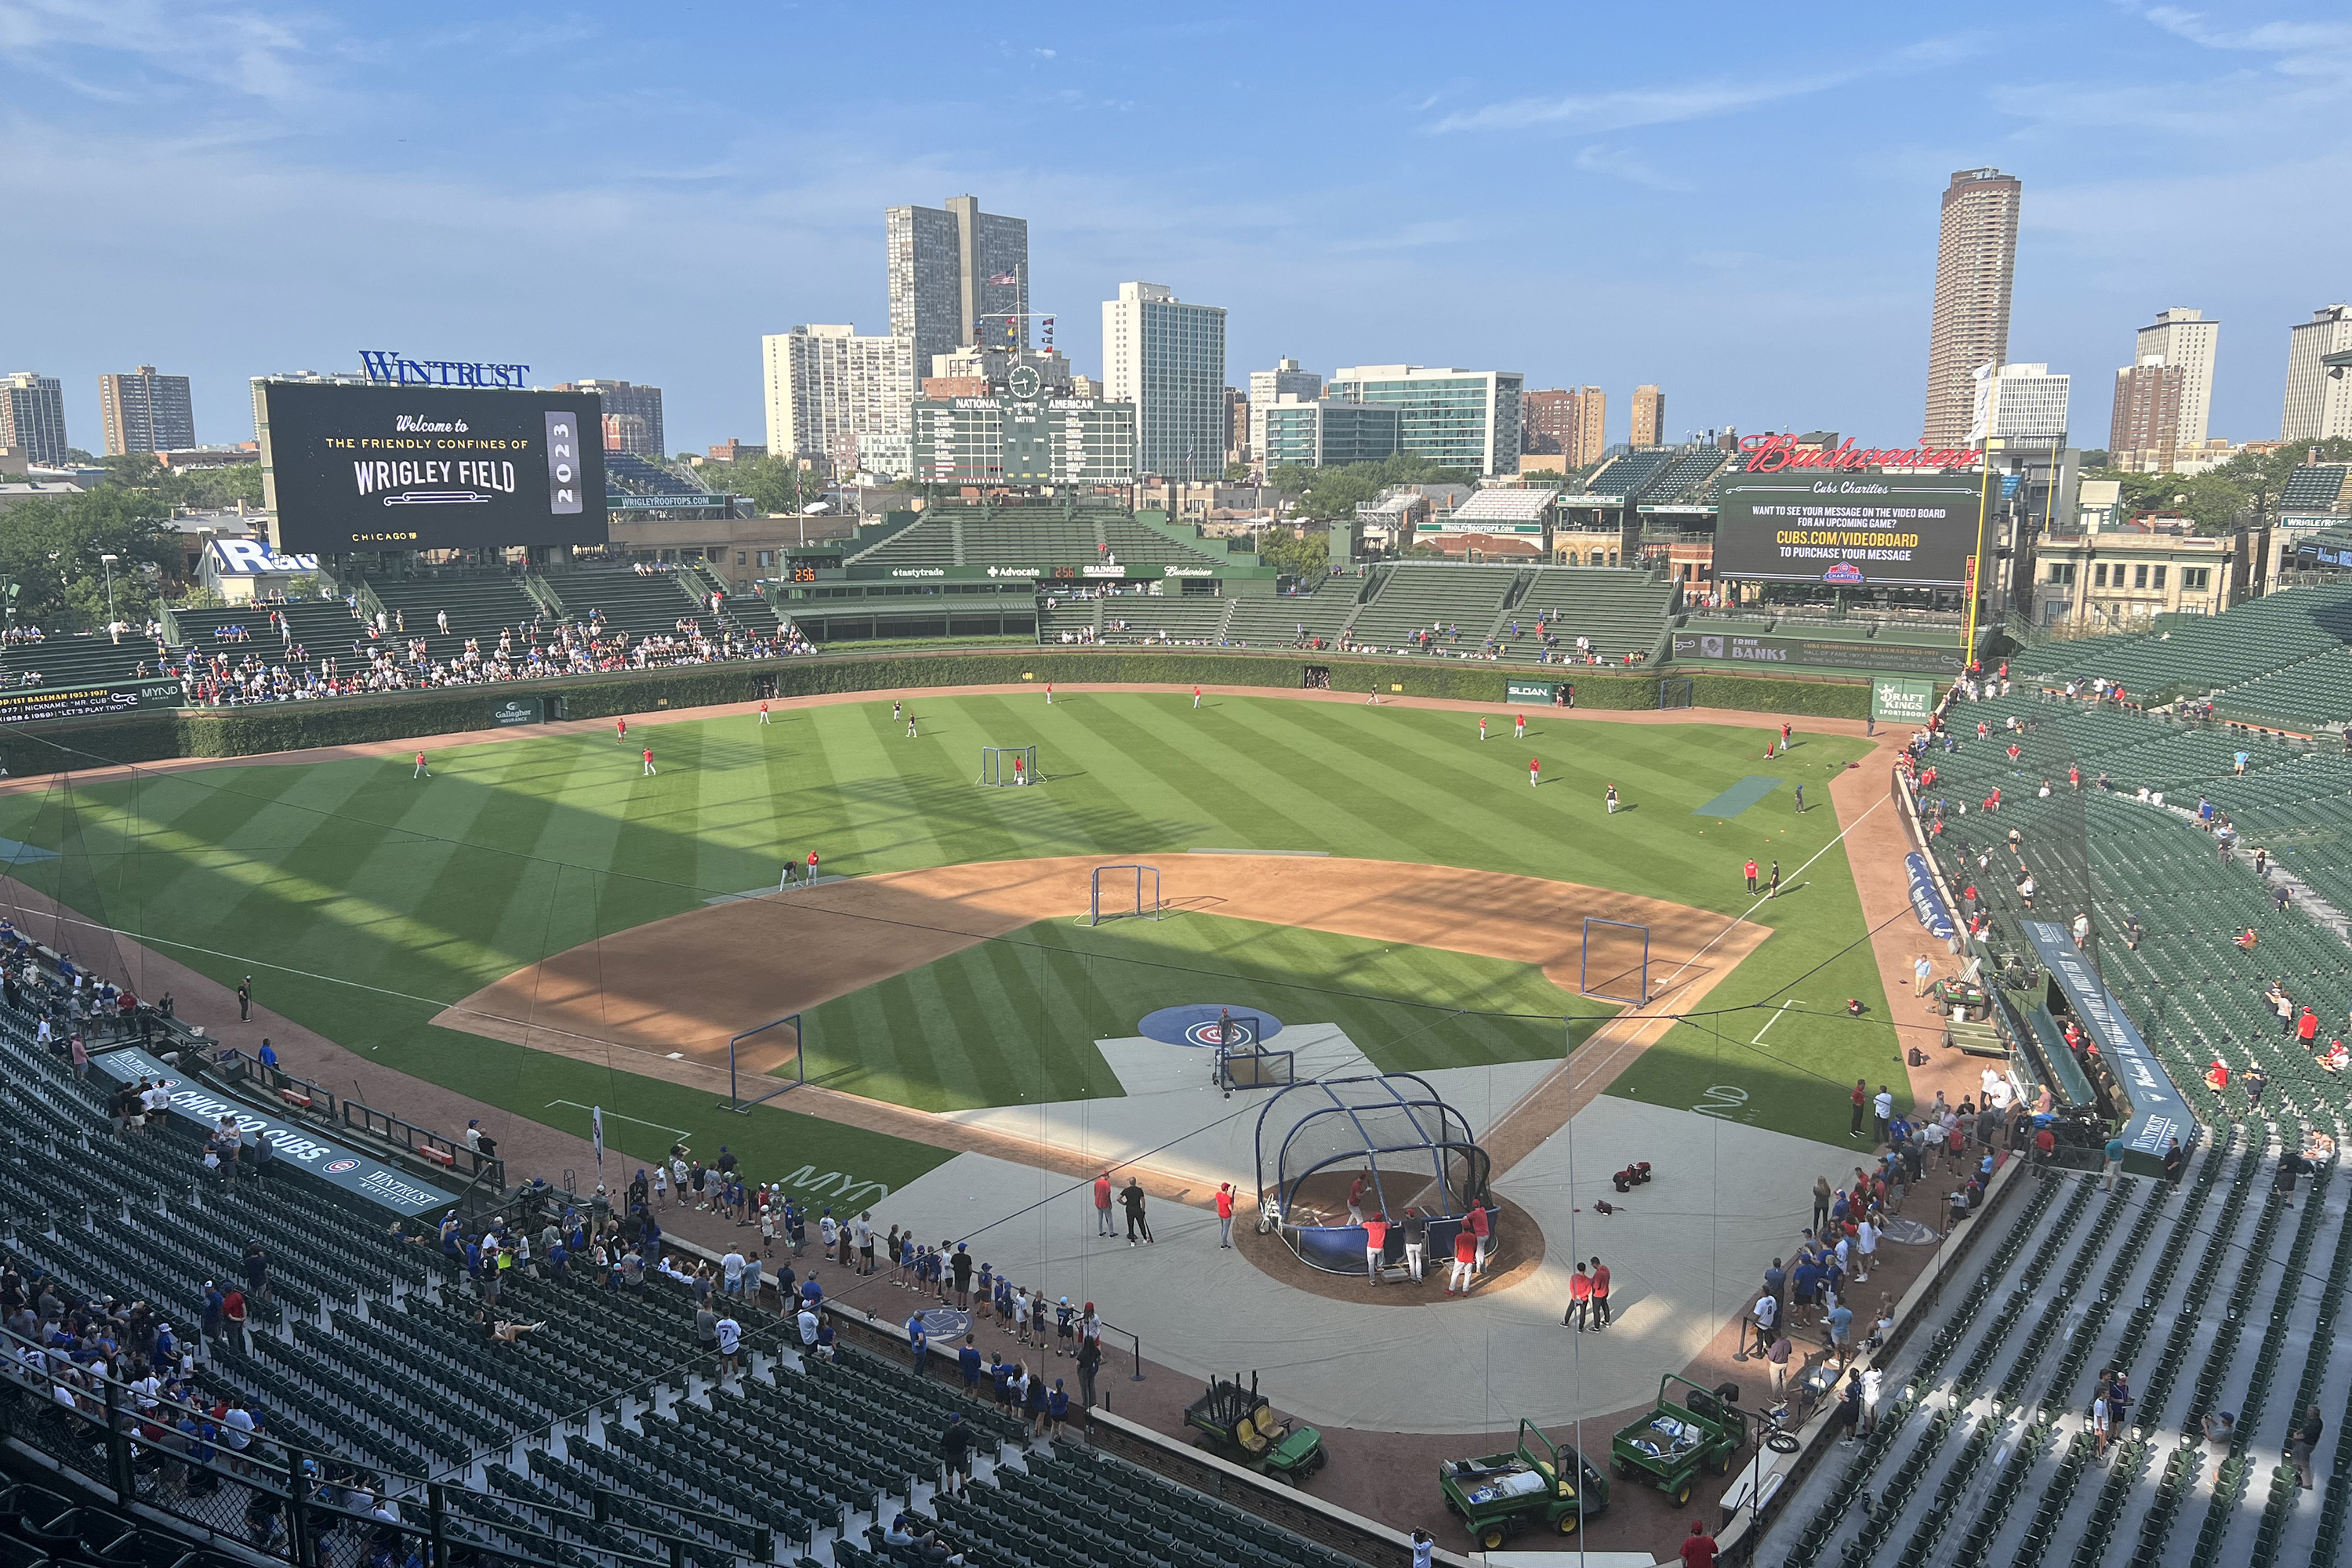 Cubs deny Cell rumors: 'We look forward to opening night at Wrigley